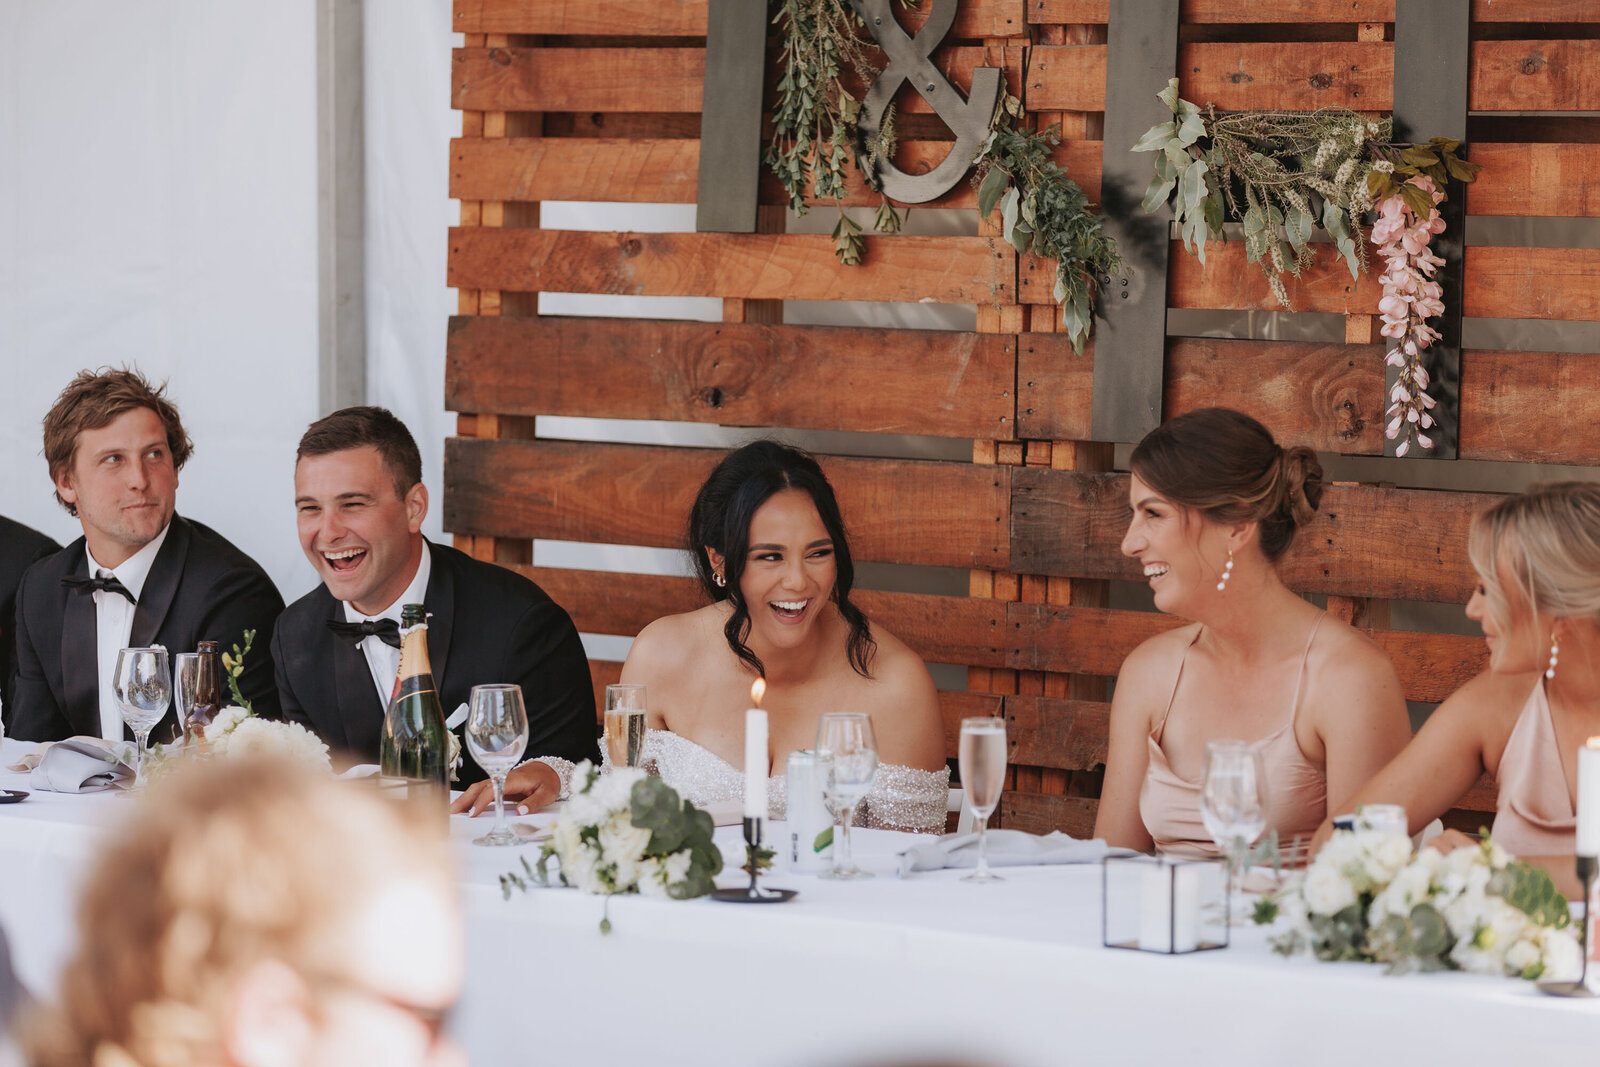 Luna-and-Sol-Anna-Whitehead-Wedding-Photographer-Melbourne-Adelaide-tom-holly-211